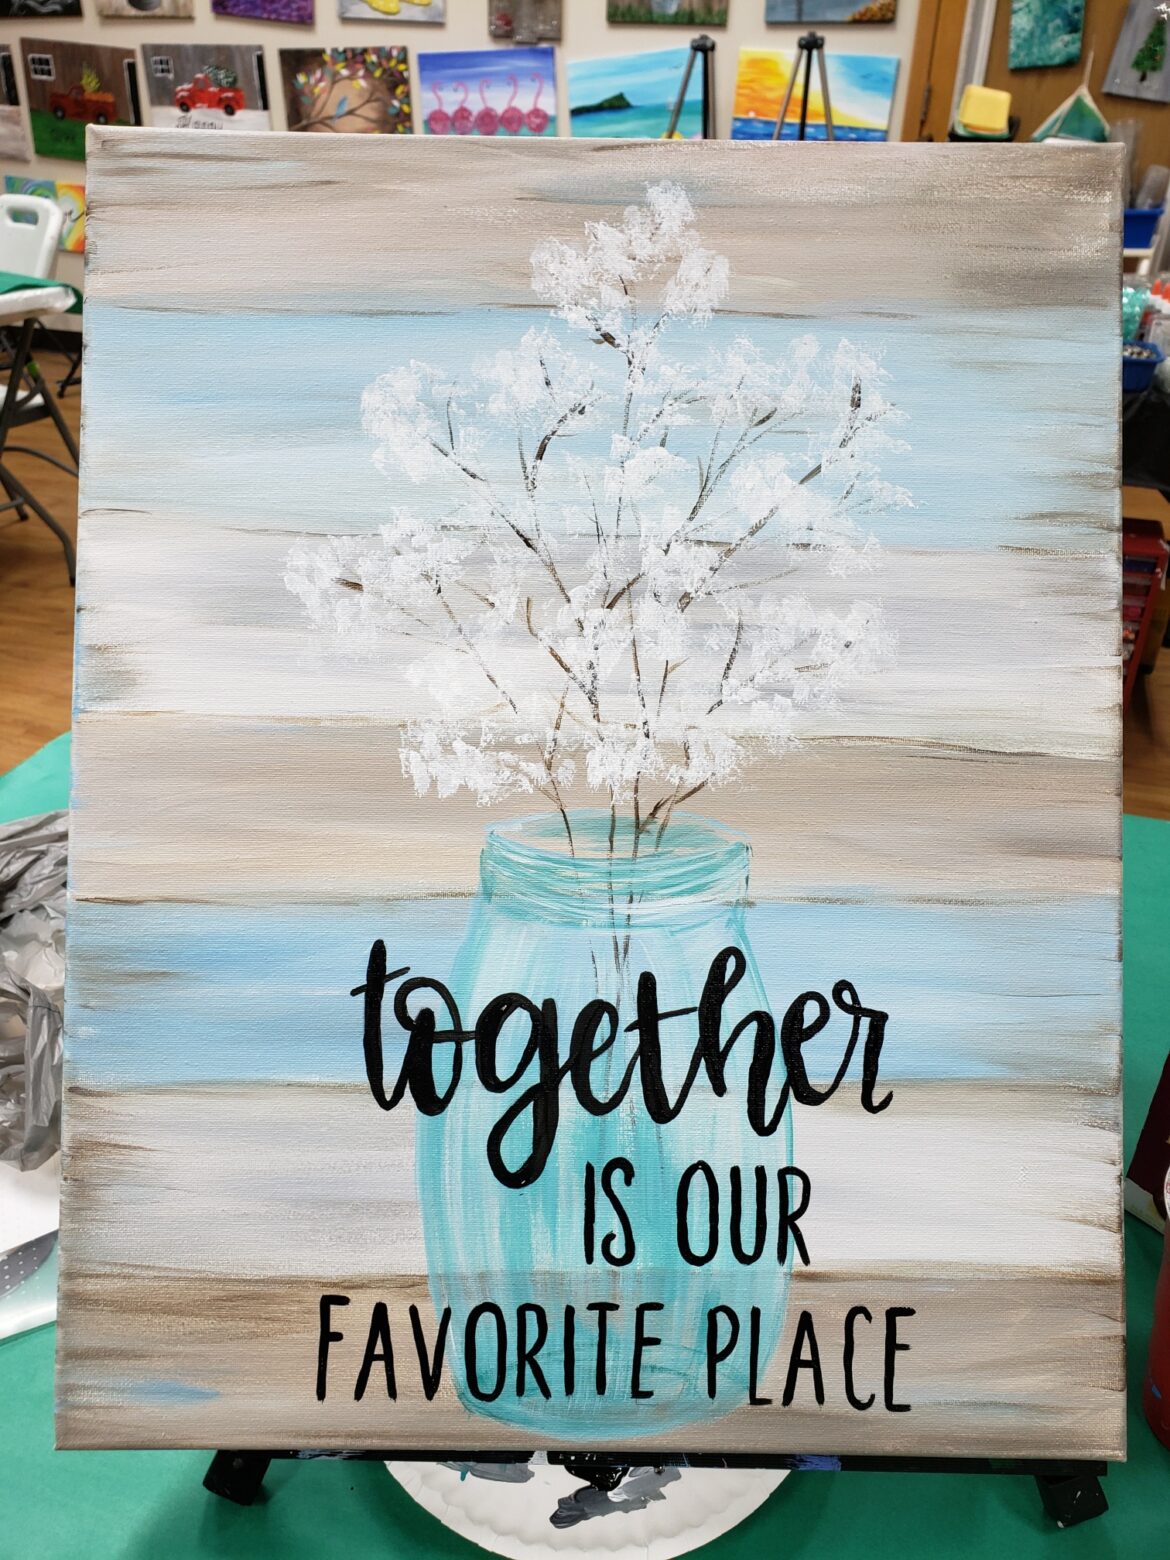 Together is our favorite place and The Paint Shack is our favorite place too!